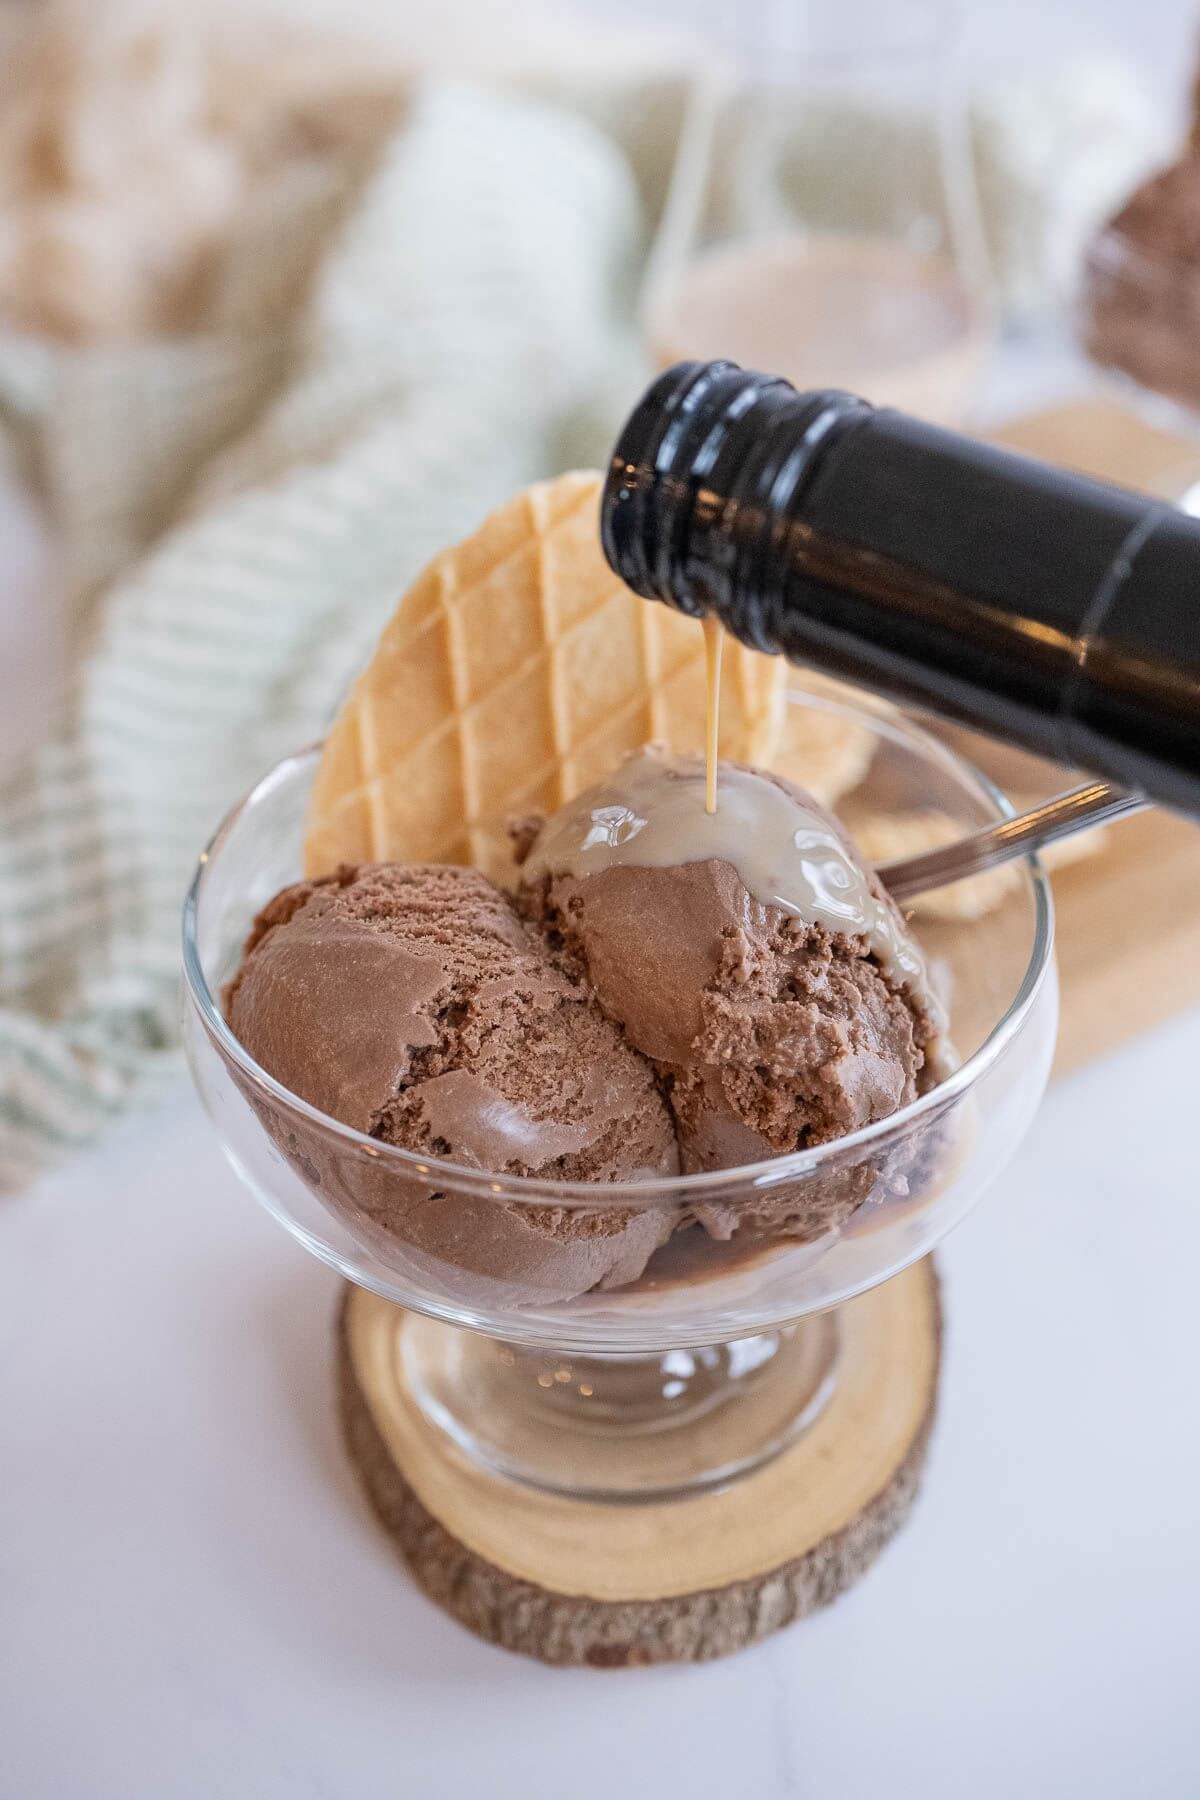 A dark bottle neck pours out creamy liquor over scoops of ice cream in a clear dish.